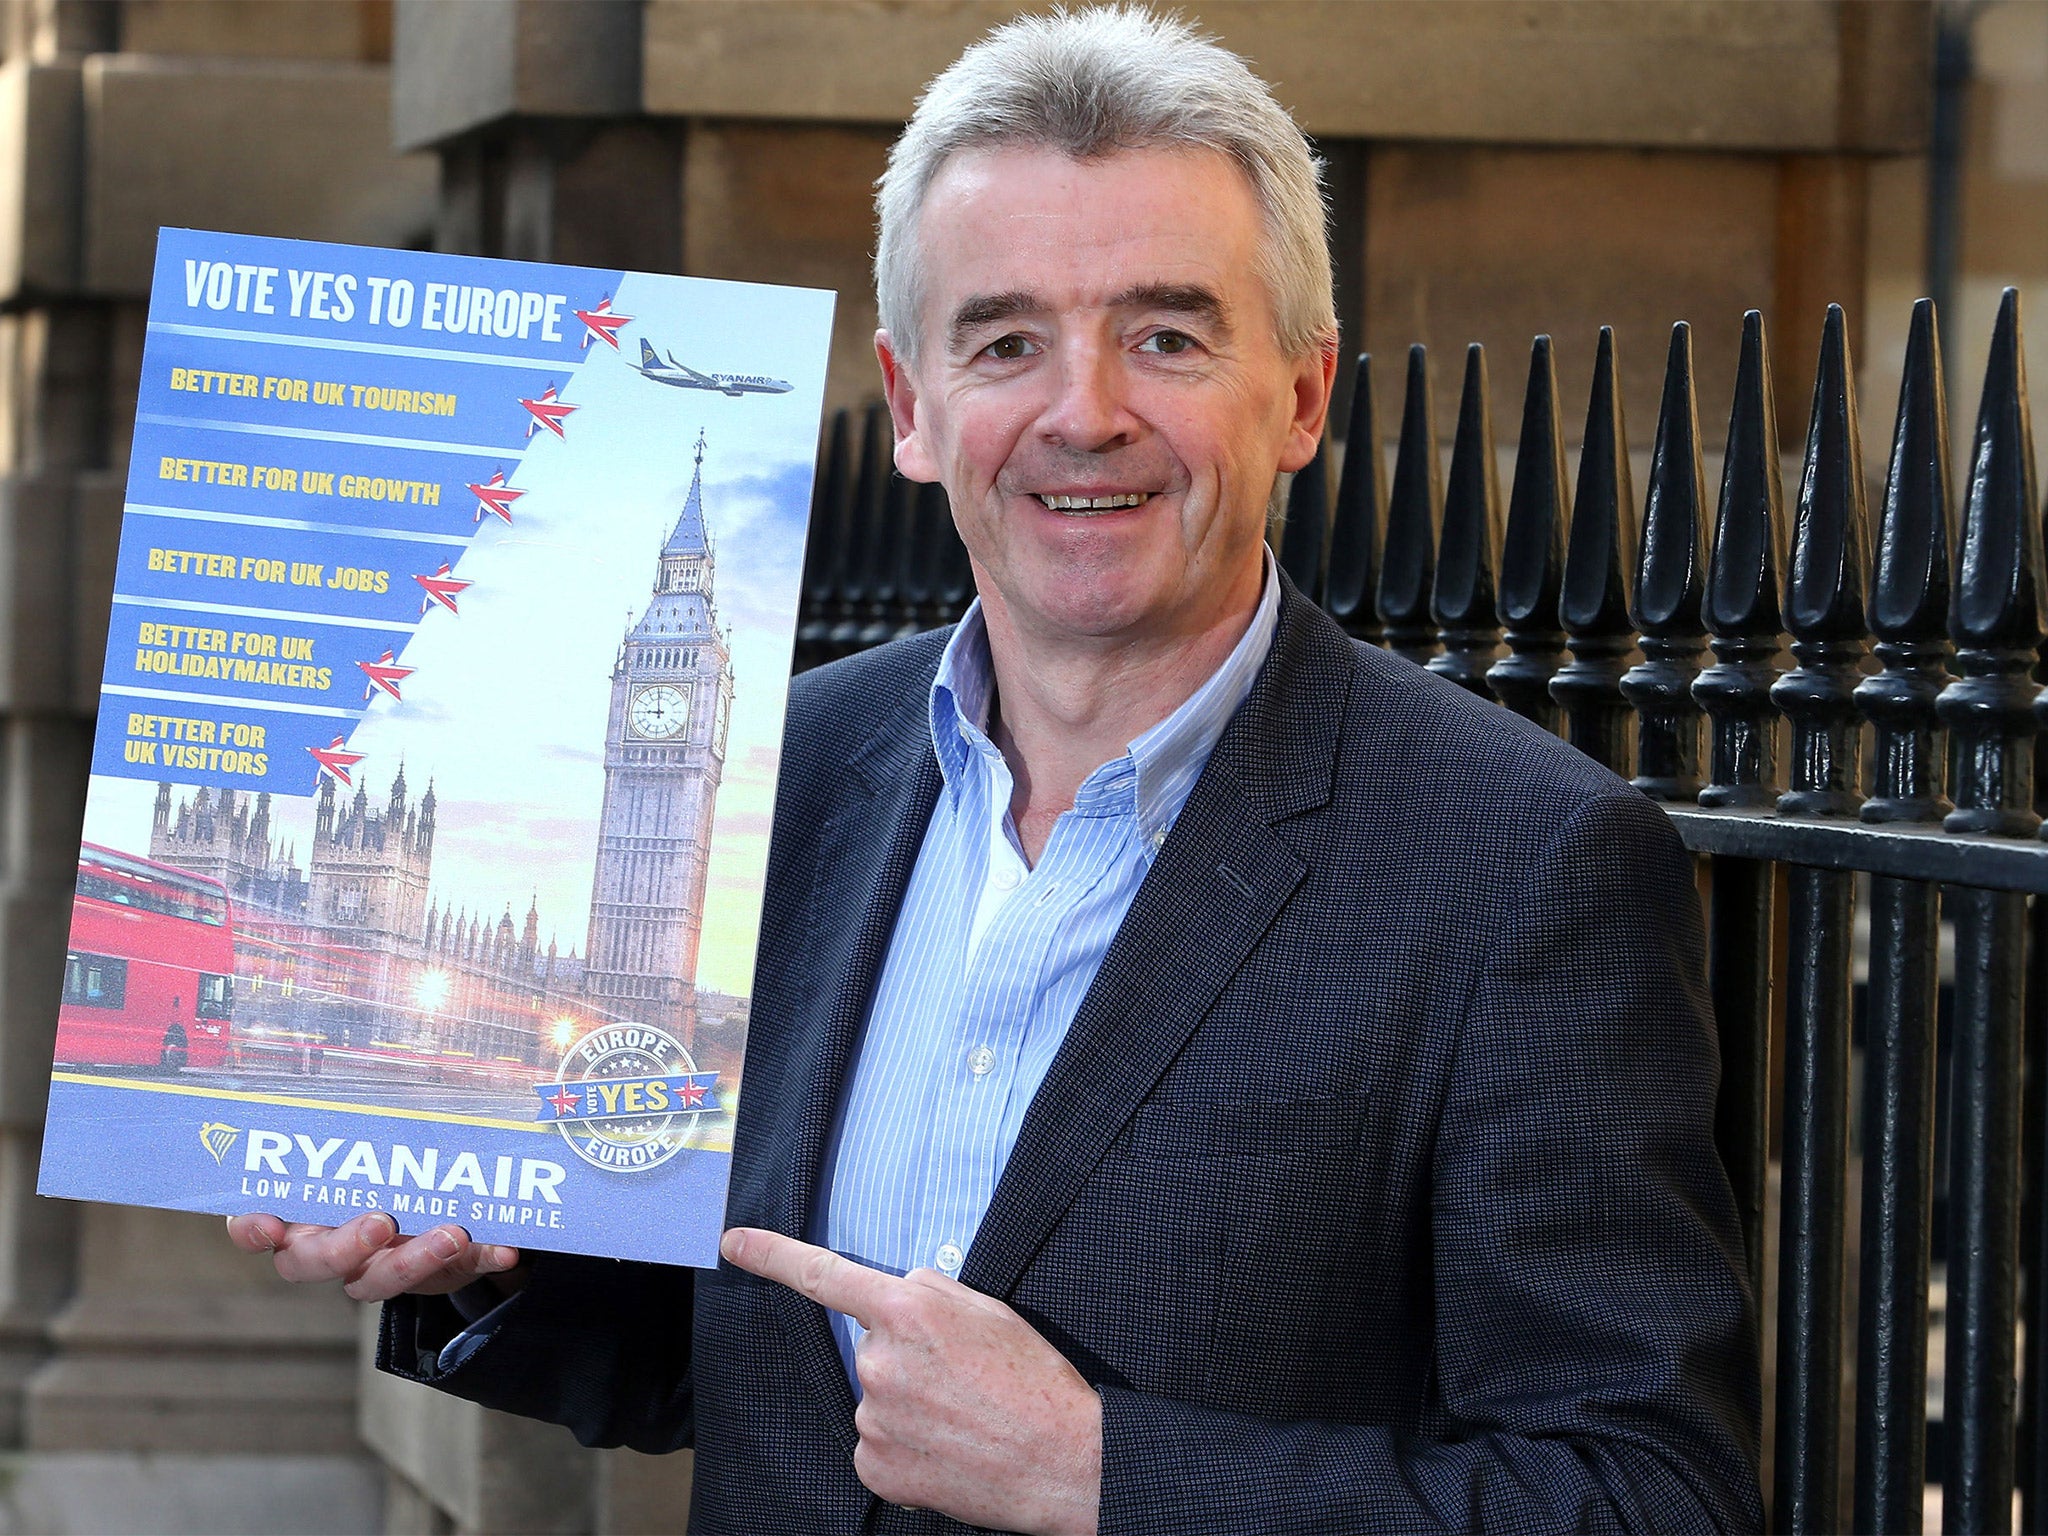 Ryanair CEO Michael O'Leary launching the airline's Yes to Europe campaign